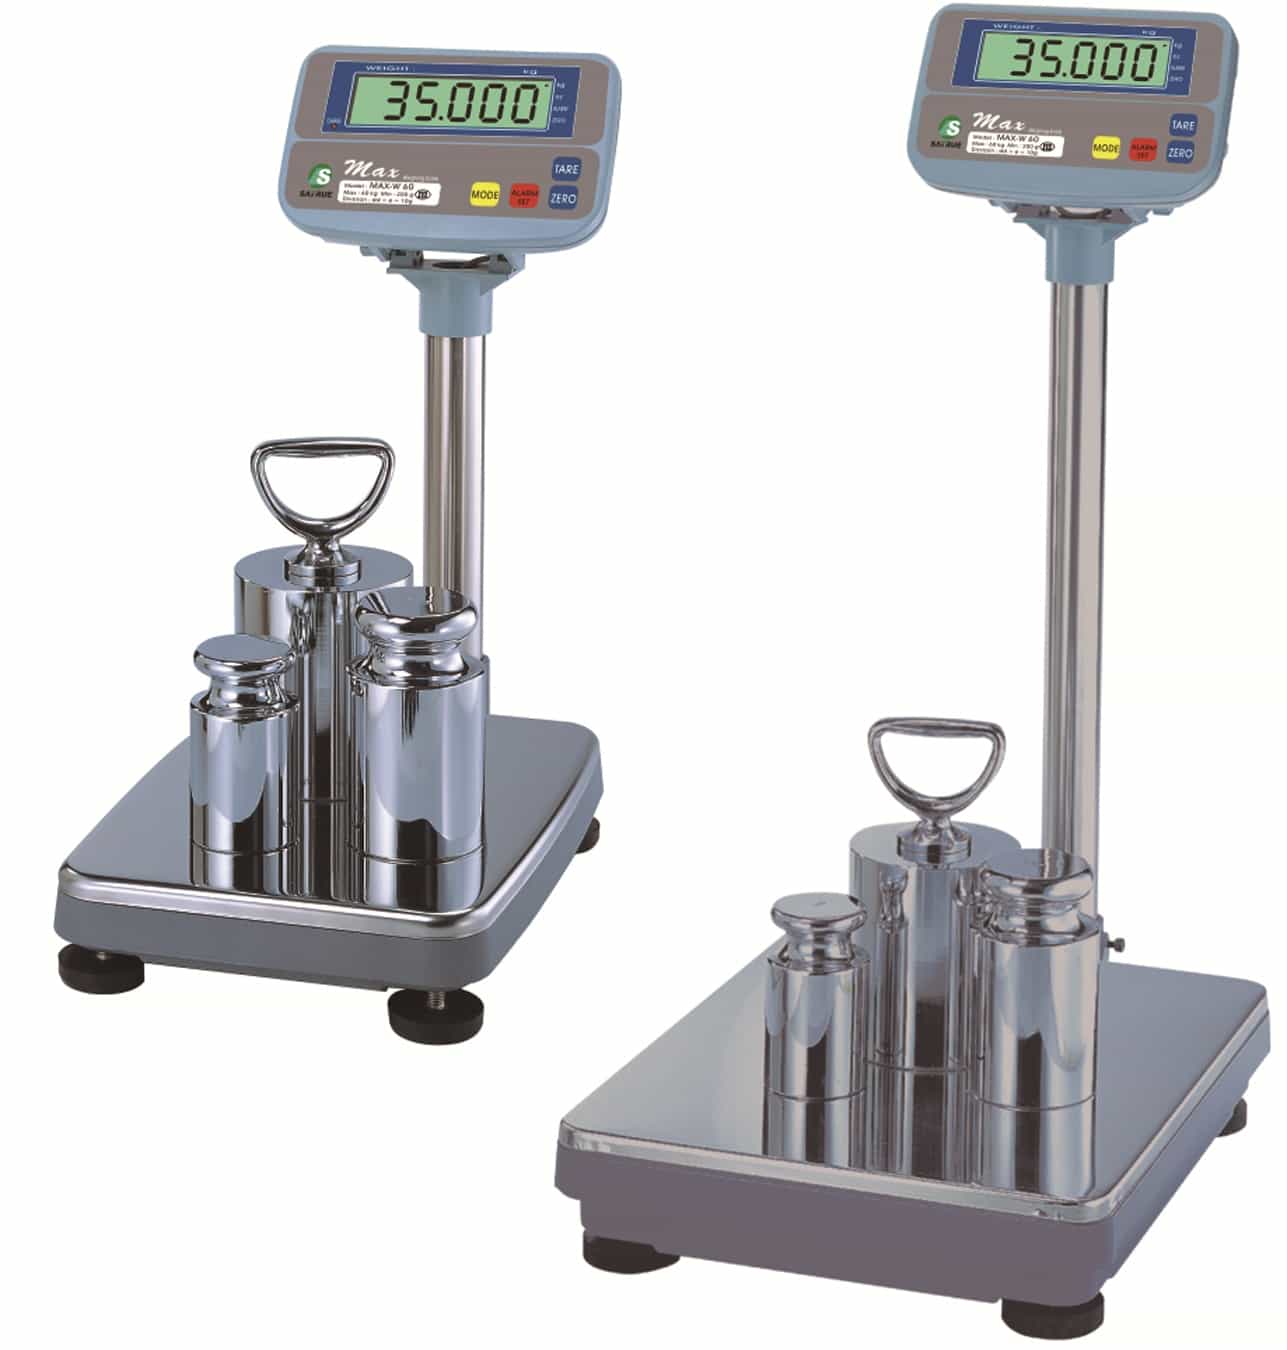 atform weighing scale